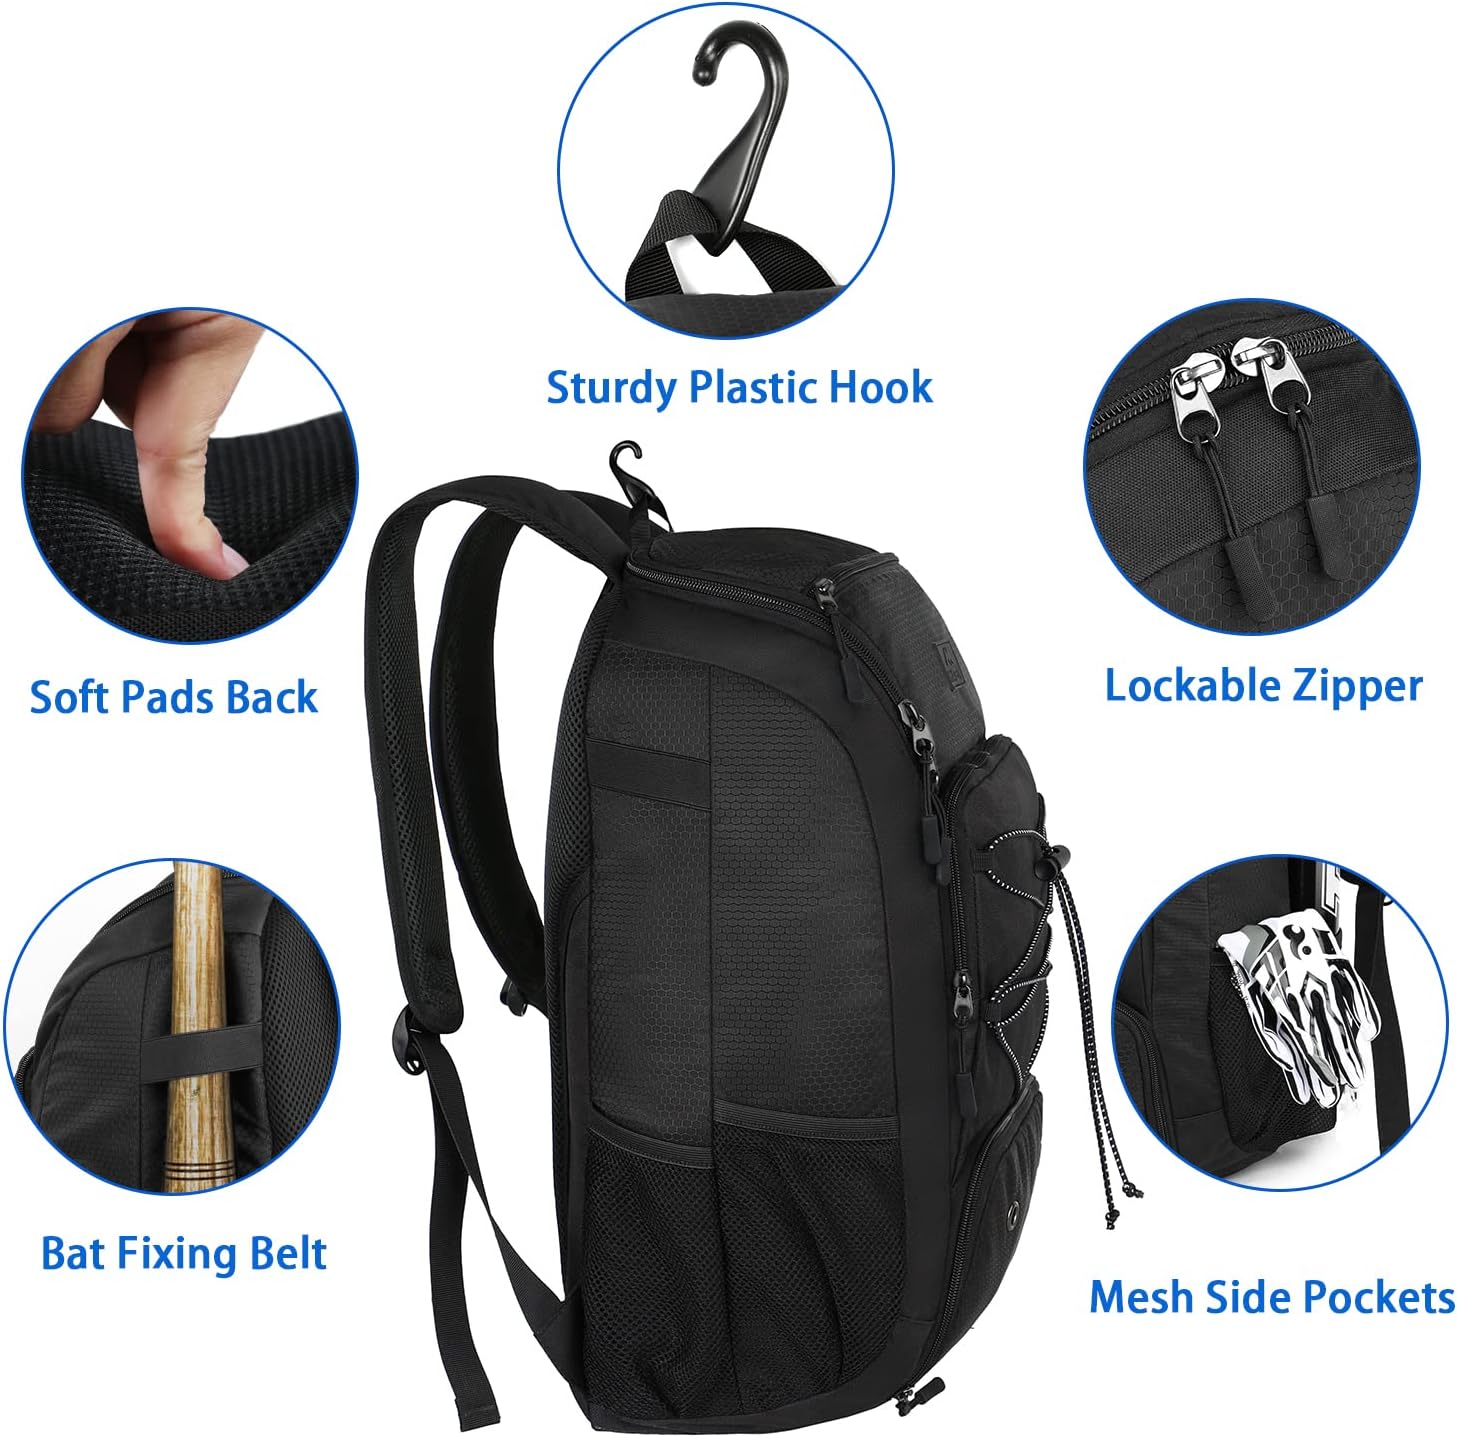 29L Baseball Backpack, Softball Bat Bag with Shoes Compartment Lightweight Baseball Bag with Fence Hook 